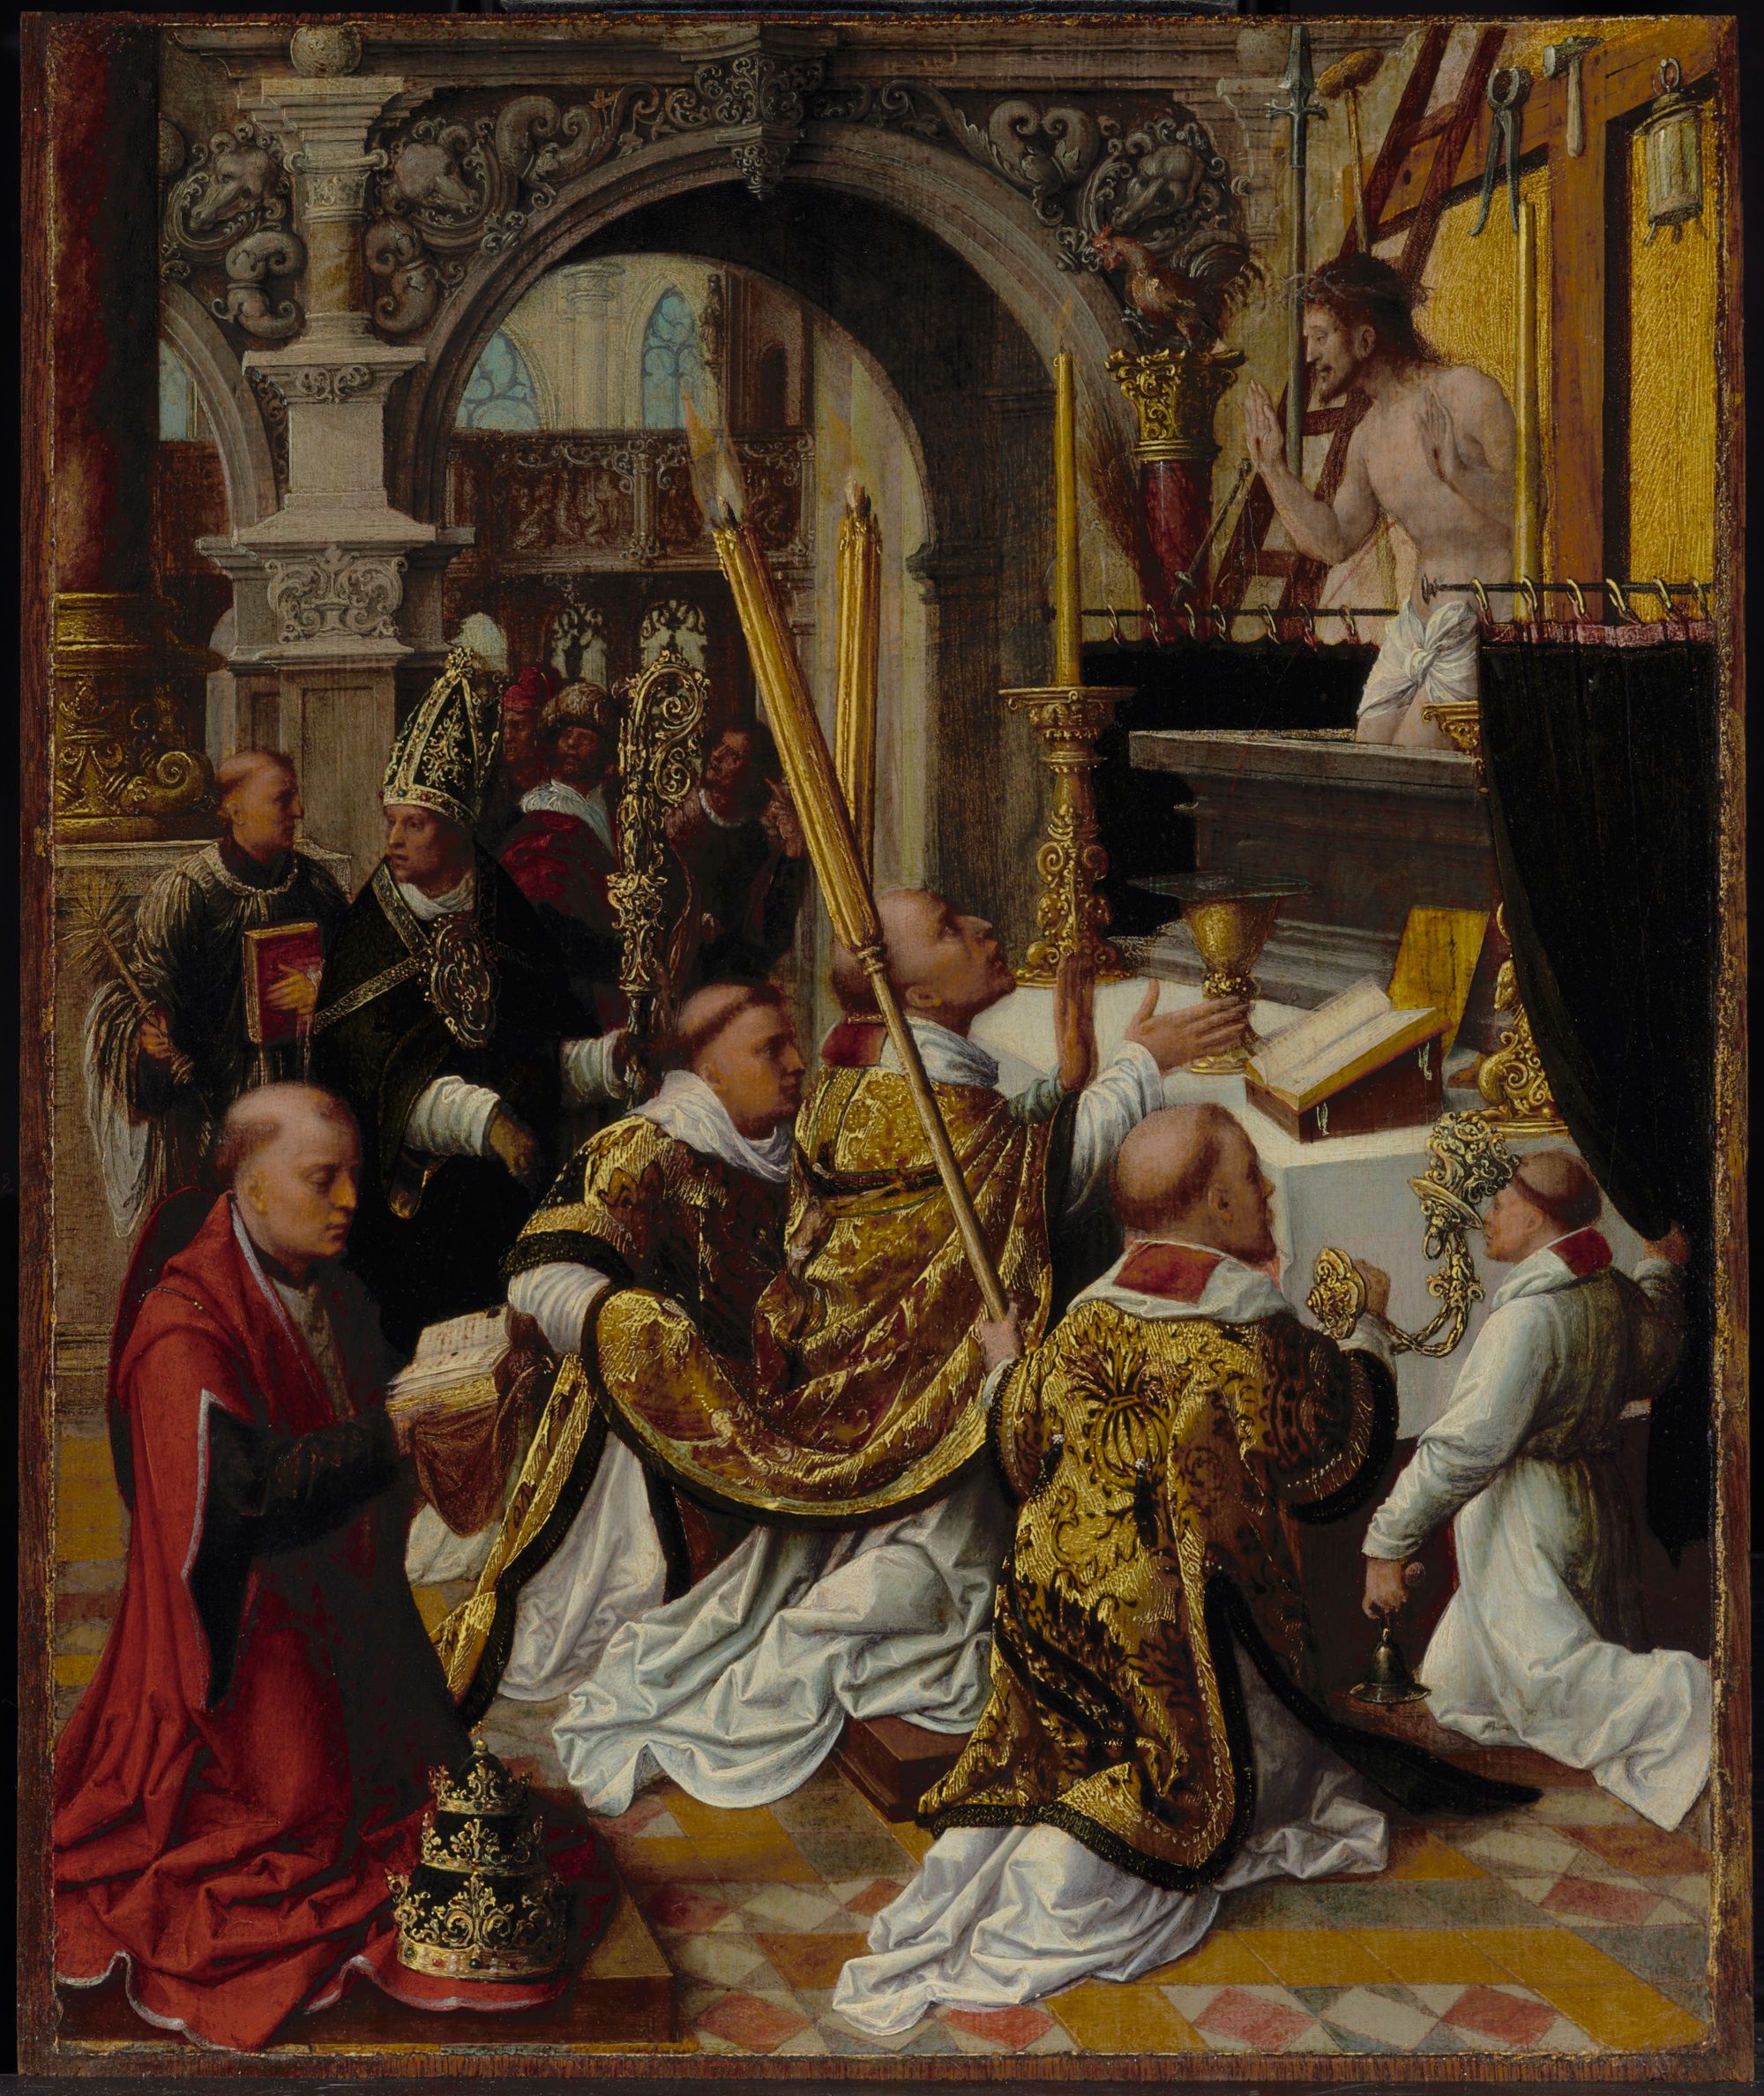 The Mass of Saint Gregory the Great by Adriaen Ysenbrandt (1510-1550) - Public Domain Catholic Painting